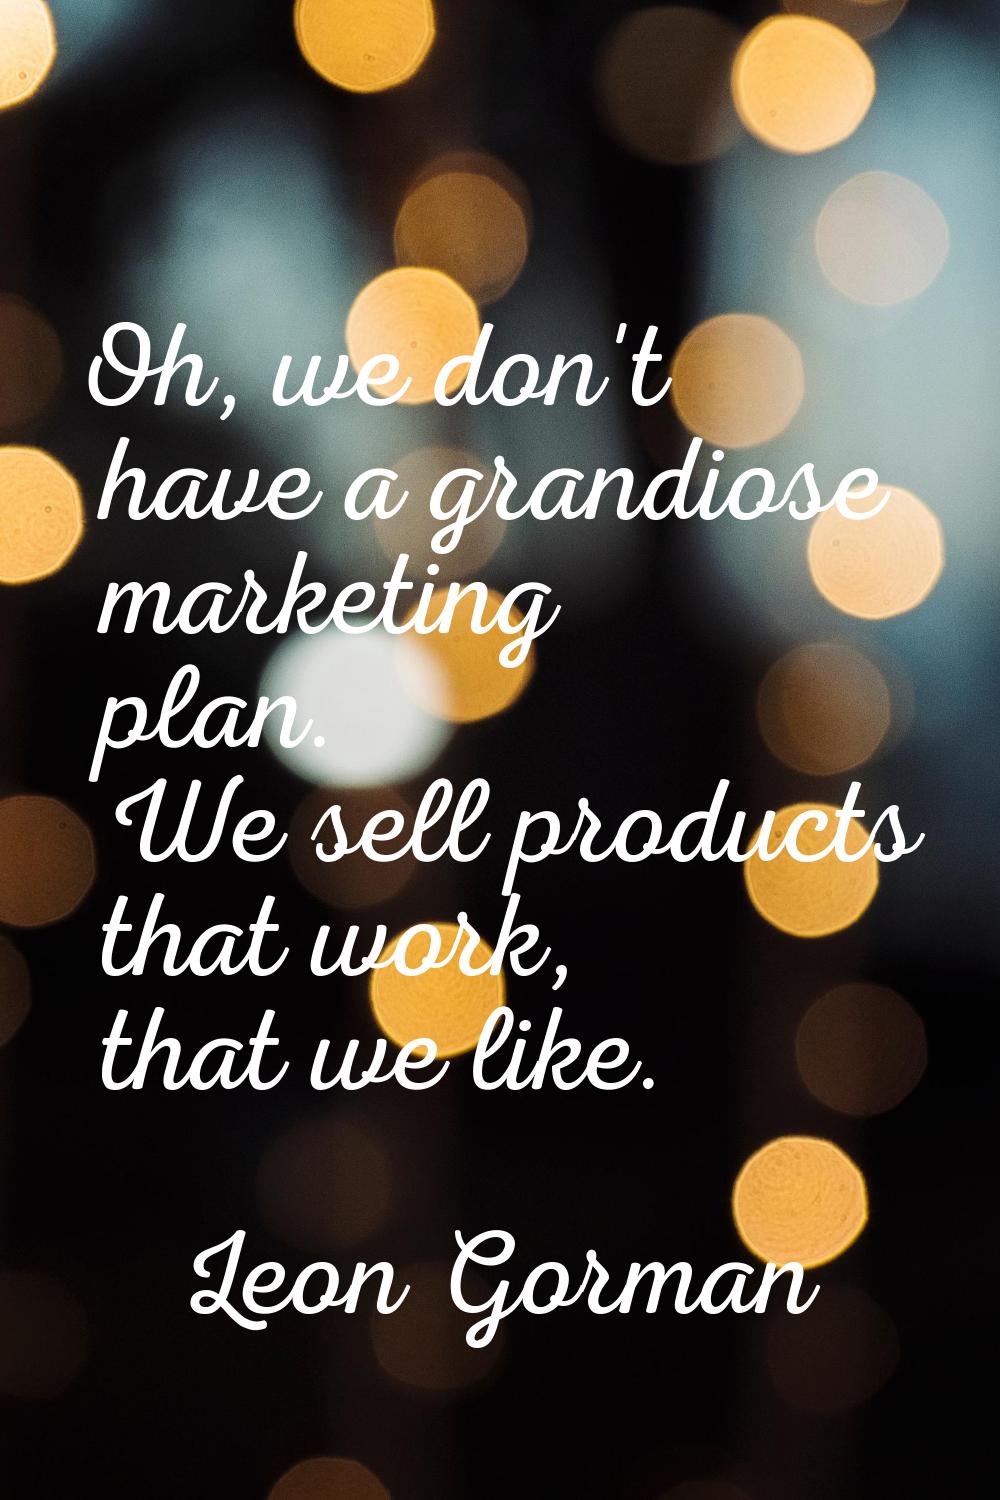 Oh, we don't have a grandiose marketing plan. We sell products that work, that we like.